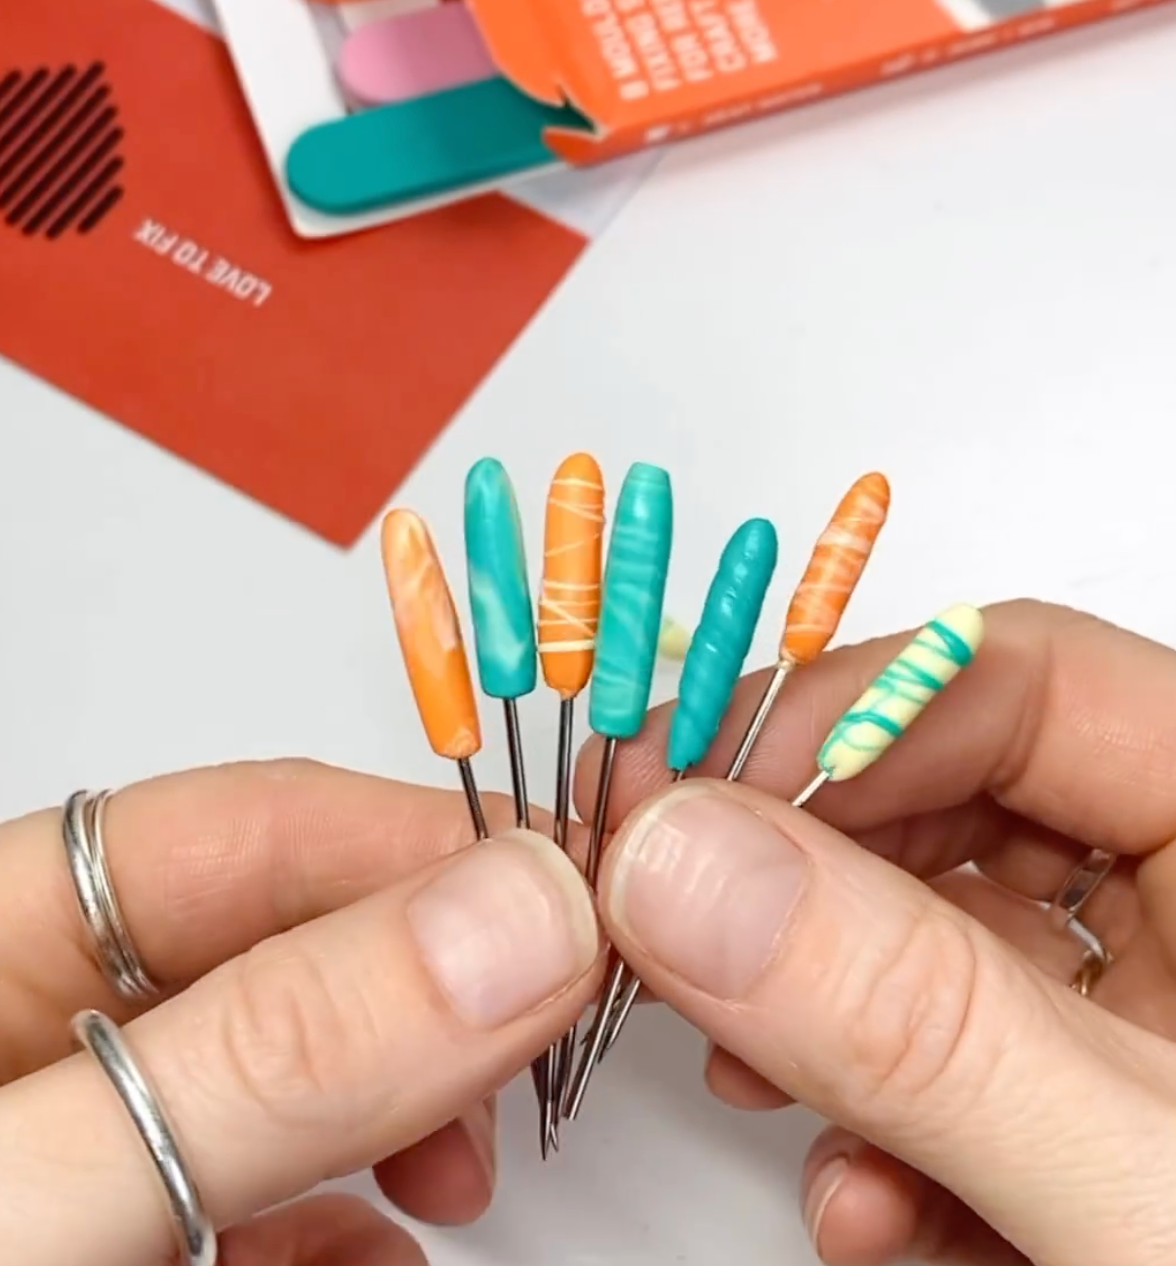 Get crafting with FixIts